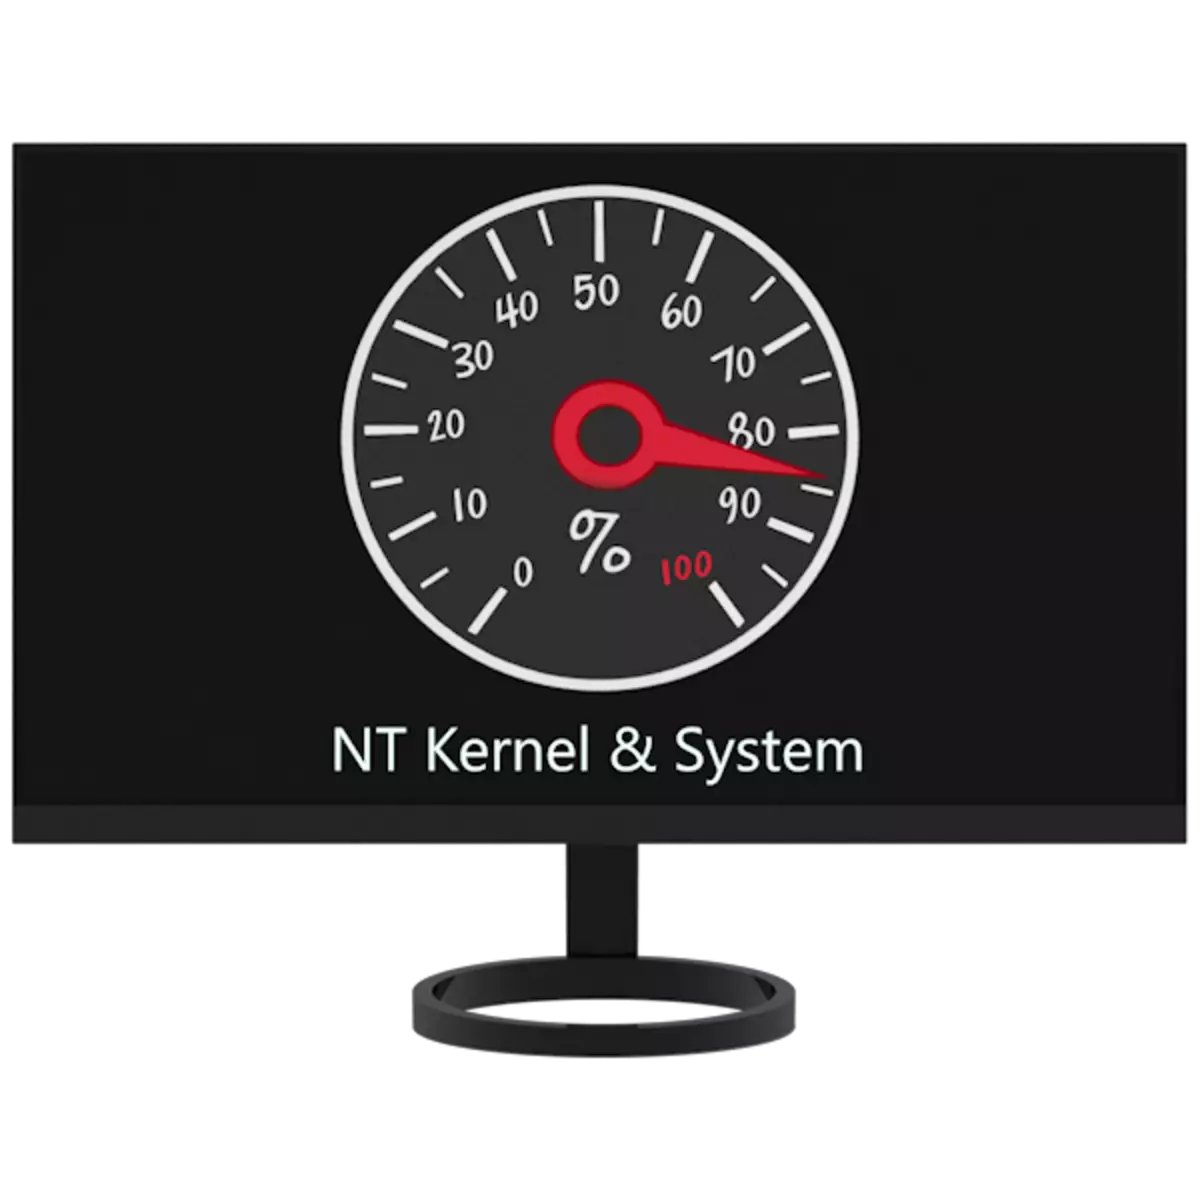 NT Kernel & Systems Surgical Windows 7 System